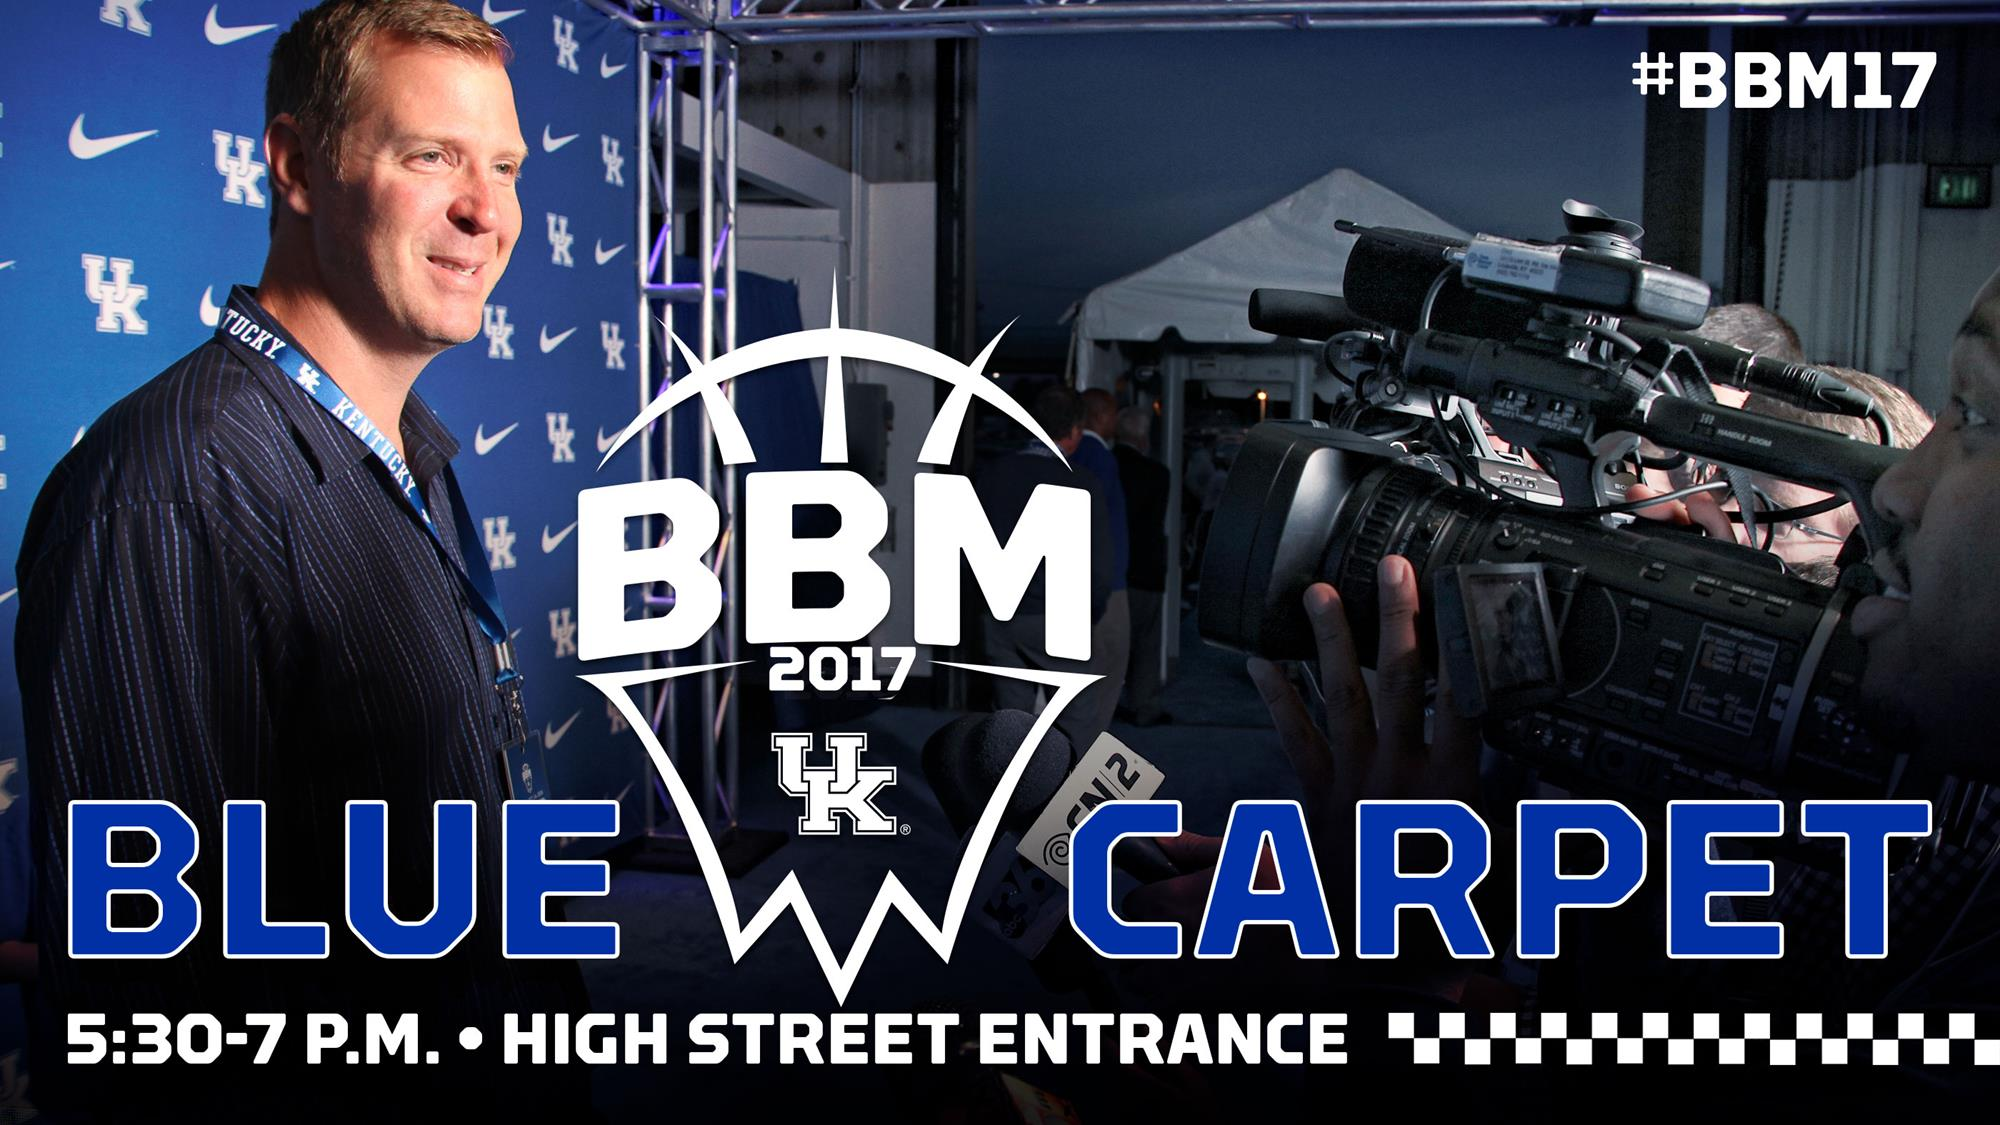 #BBM17 Presented by Papa John’s To Feature Blue Carpet Entrance